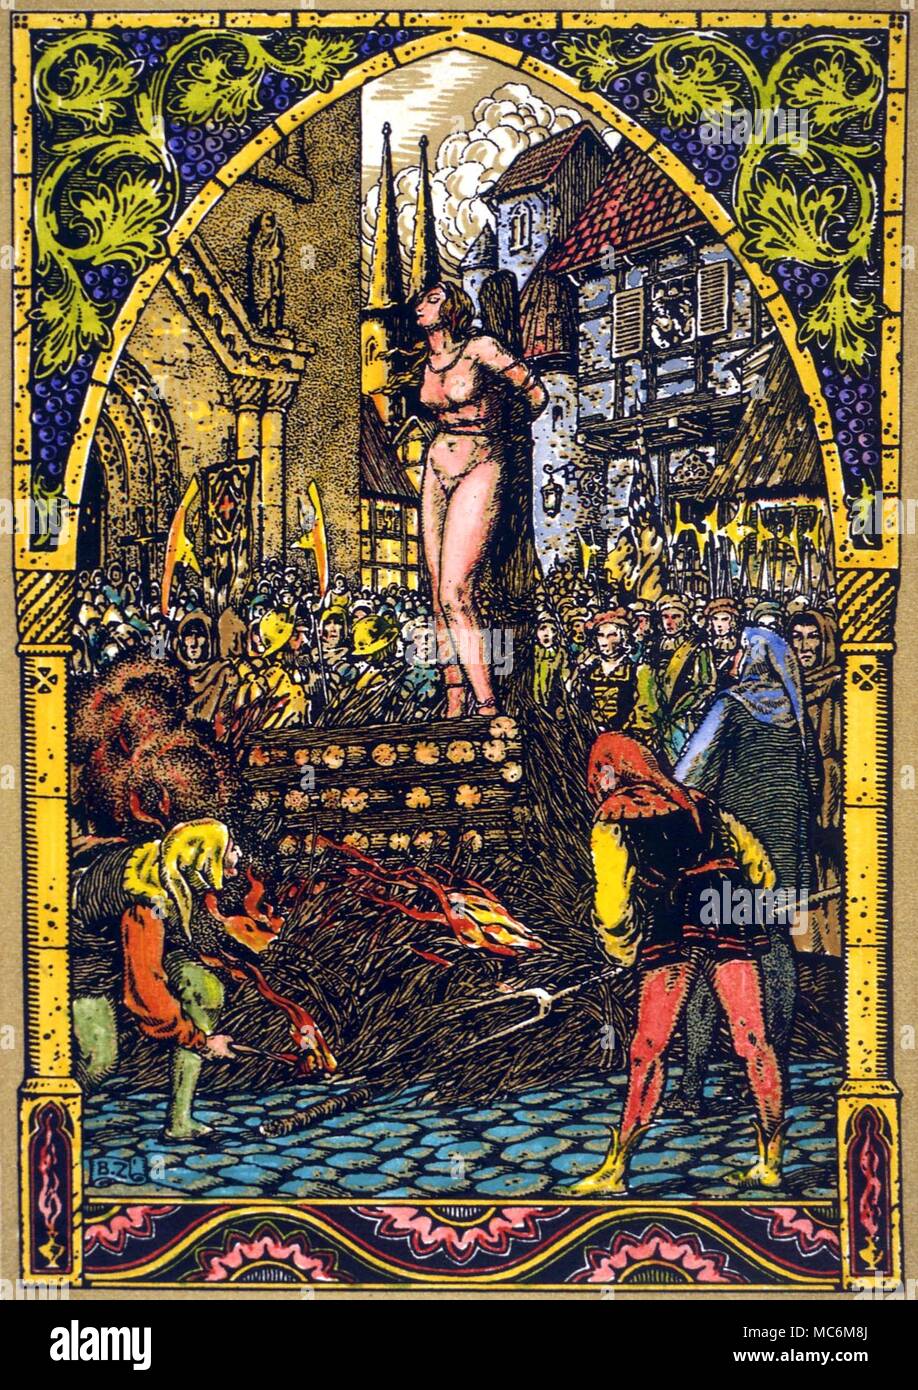 WITCHCRAFT - WITCH BURNED AT STAKE. Guillemette Babin burned at stake. Design by Bernard Zuber, to M. Carron's 'La Vie Execrable de Guillemette Babin, Sorciere', 1926 - a true story based on Bodin's book 'Demonomanie', 1580. This witch was burned to death at Poitiers, 1564 Stock Photo